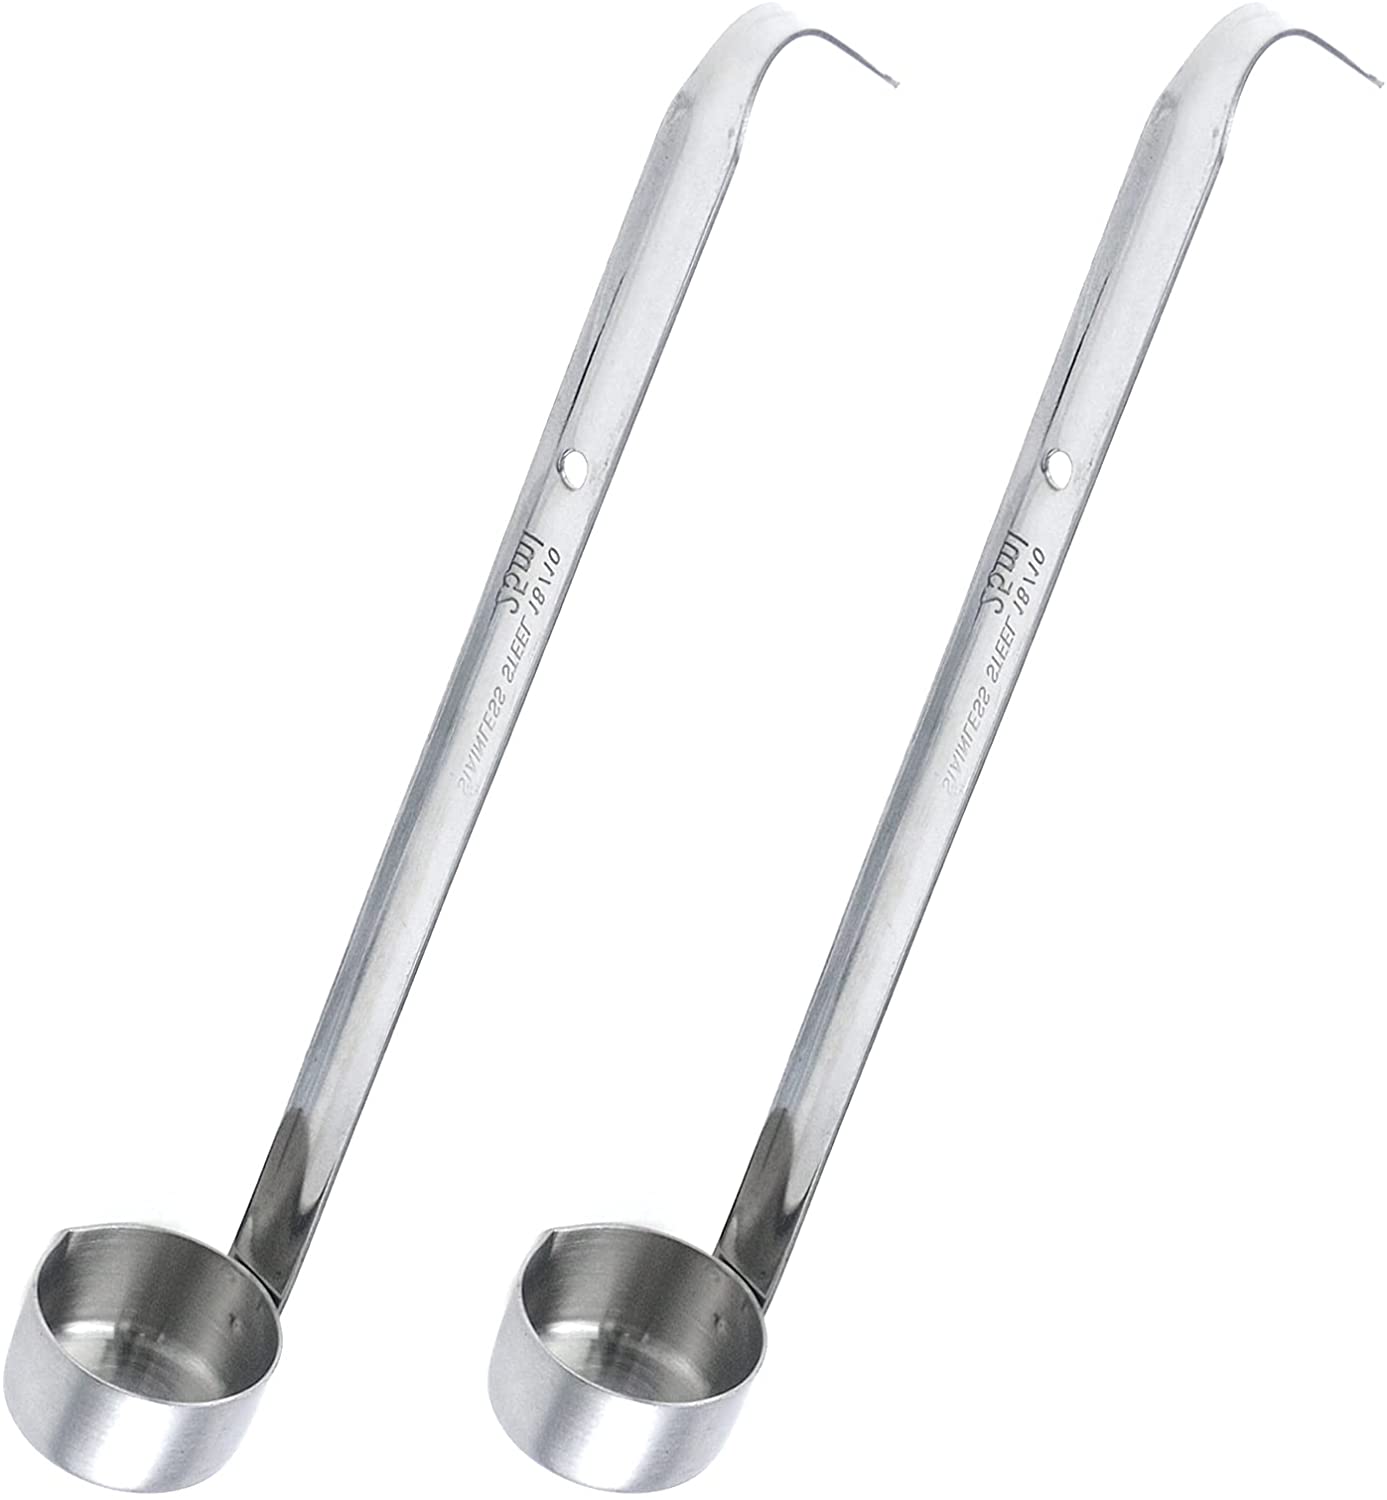 MFW 2pcs Stainless Steel Wine Dipper Long Handle Beer Pouring Spoons with Hook Ladle,50ml